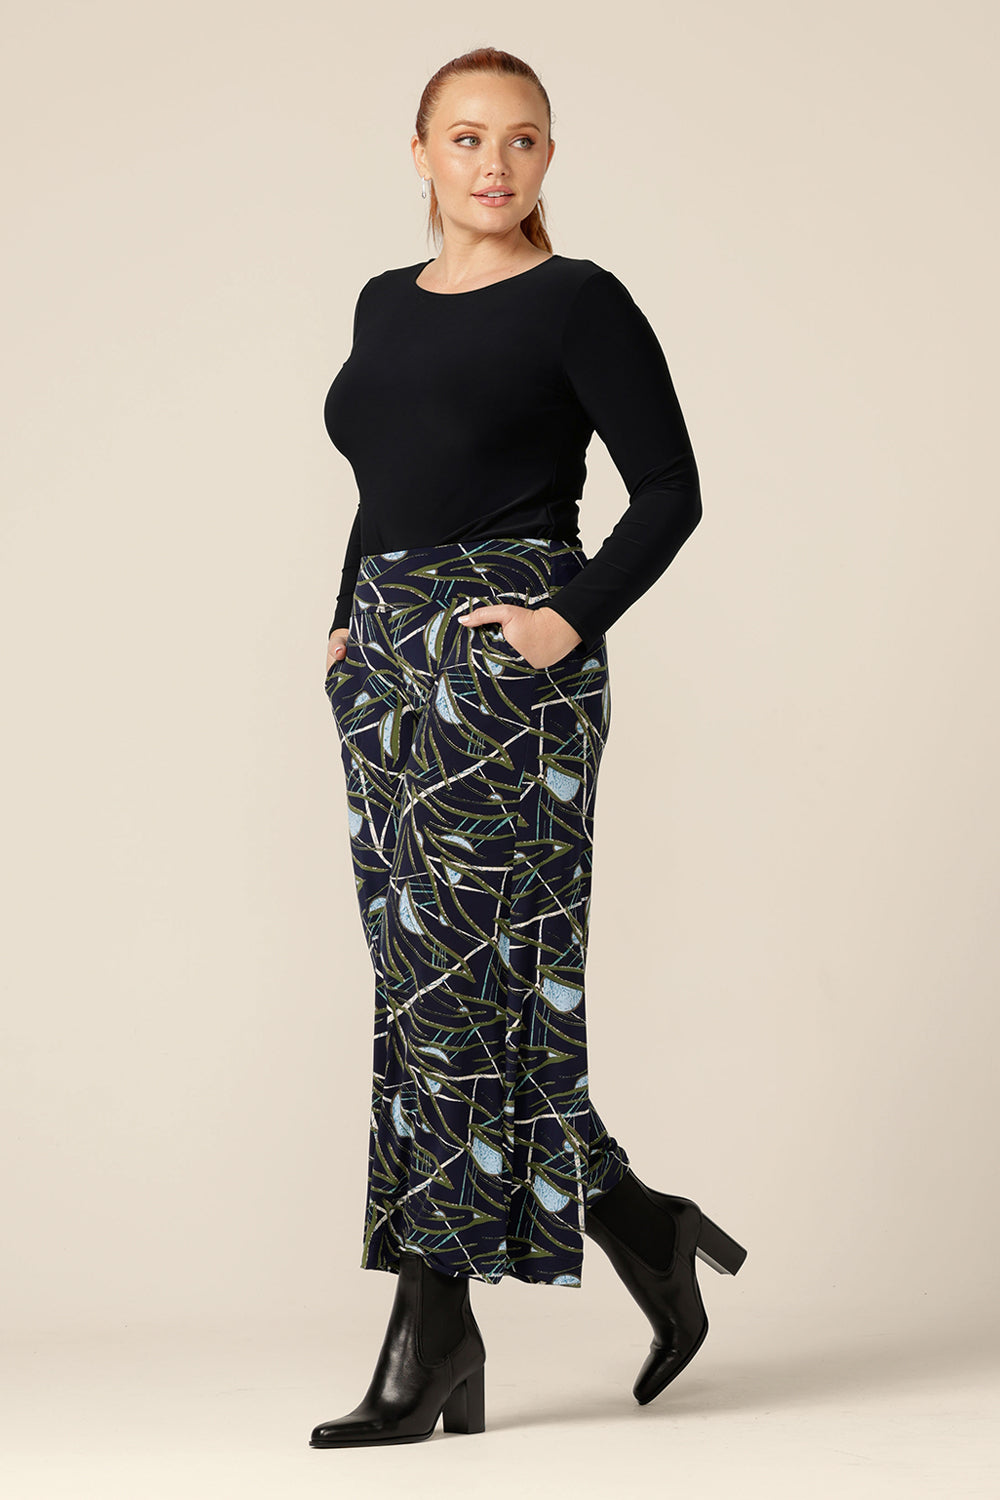 Comfortable pants for work or casual wear, these wide leg pants are made in Australia by women's clothing label, L&F. Shop wide leg work trousers in inclusive sizes, 8 to 24 online now.